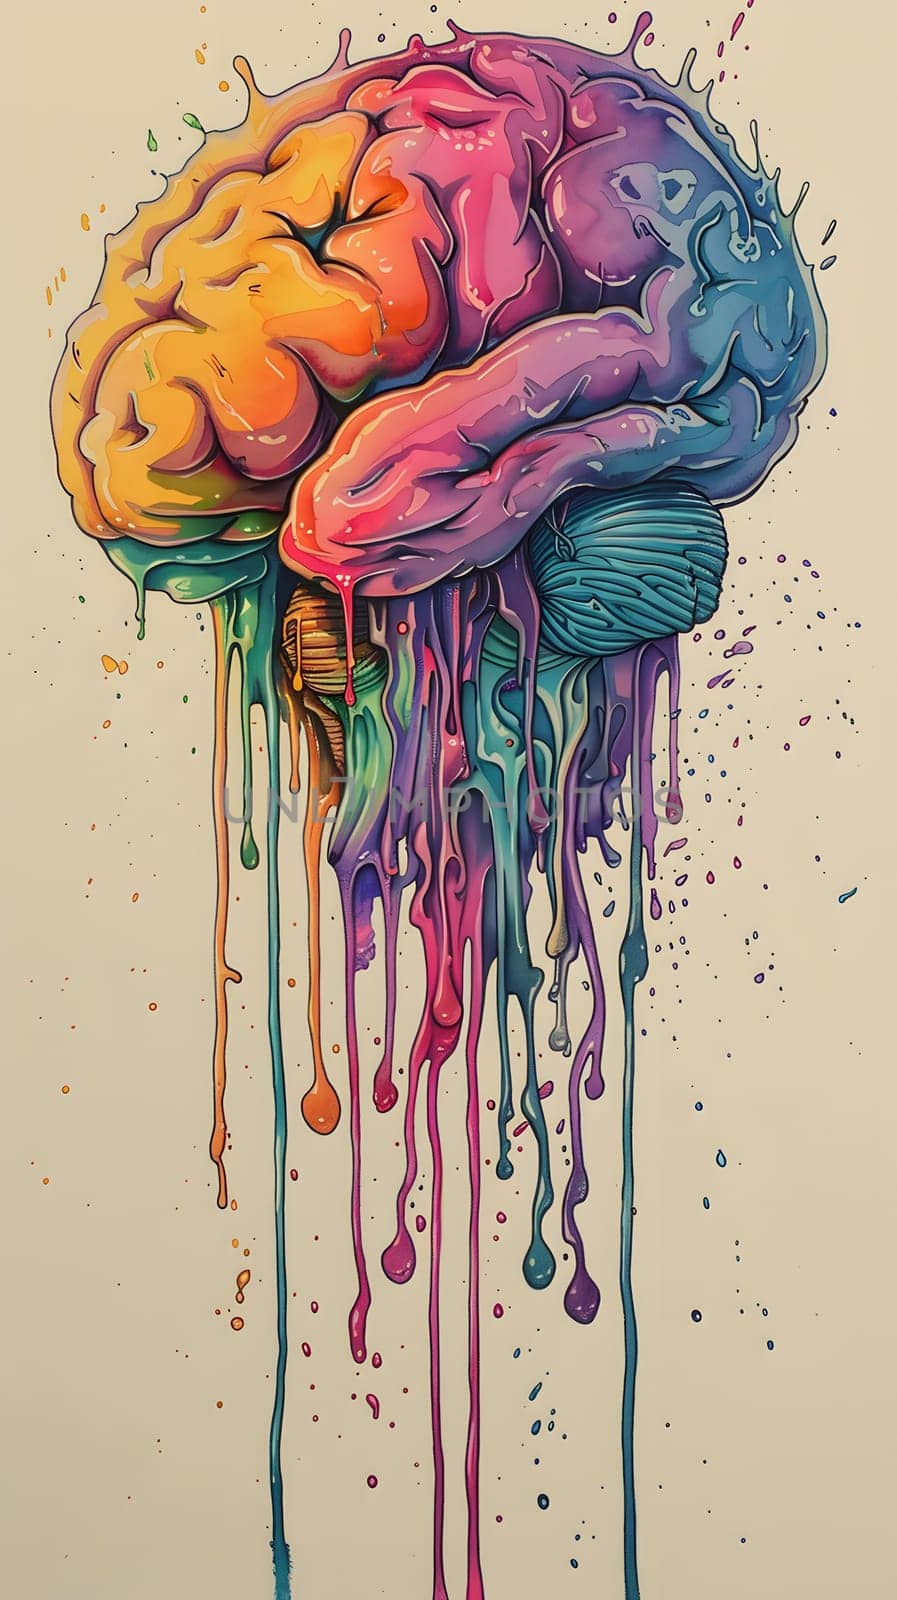 A vibrant painting of a brain with colorful paint dripping in shades of purple, pink, magenta, and violet, resembling a blooming flower petal